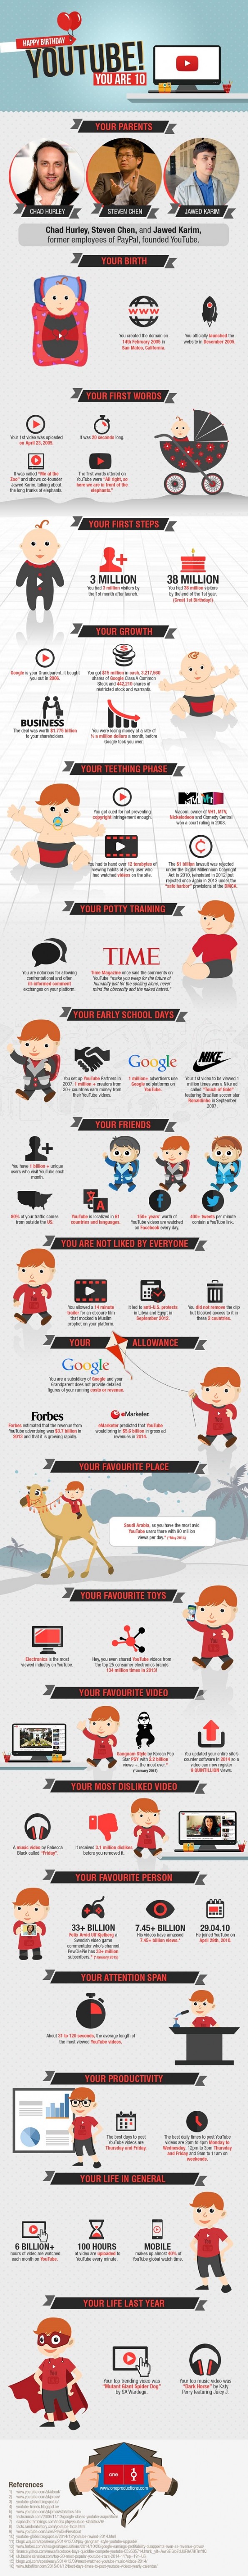 YouTube-history-infographic